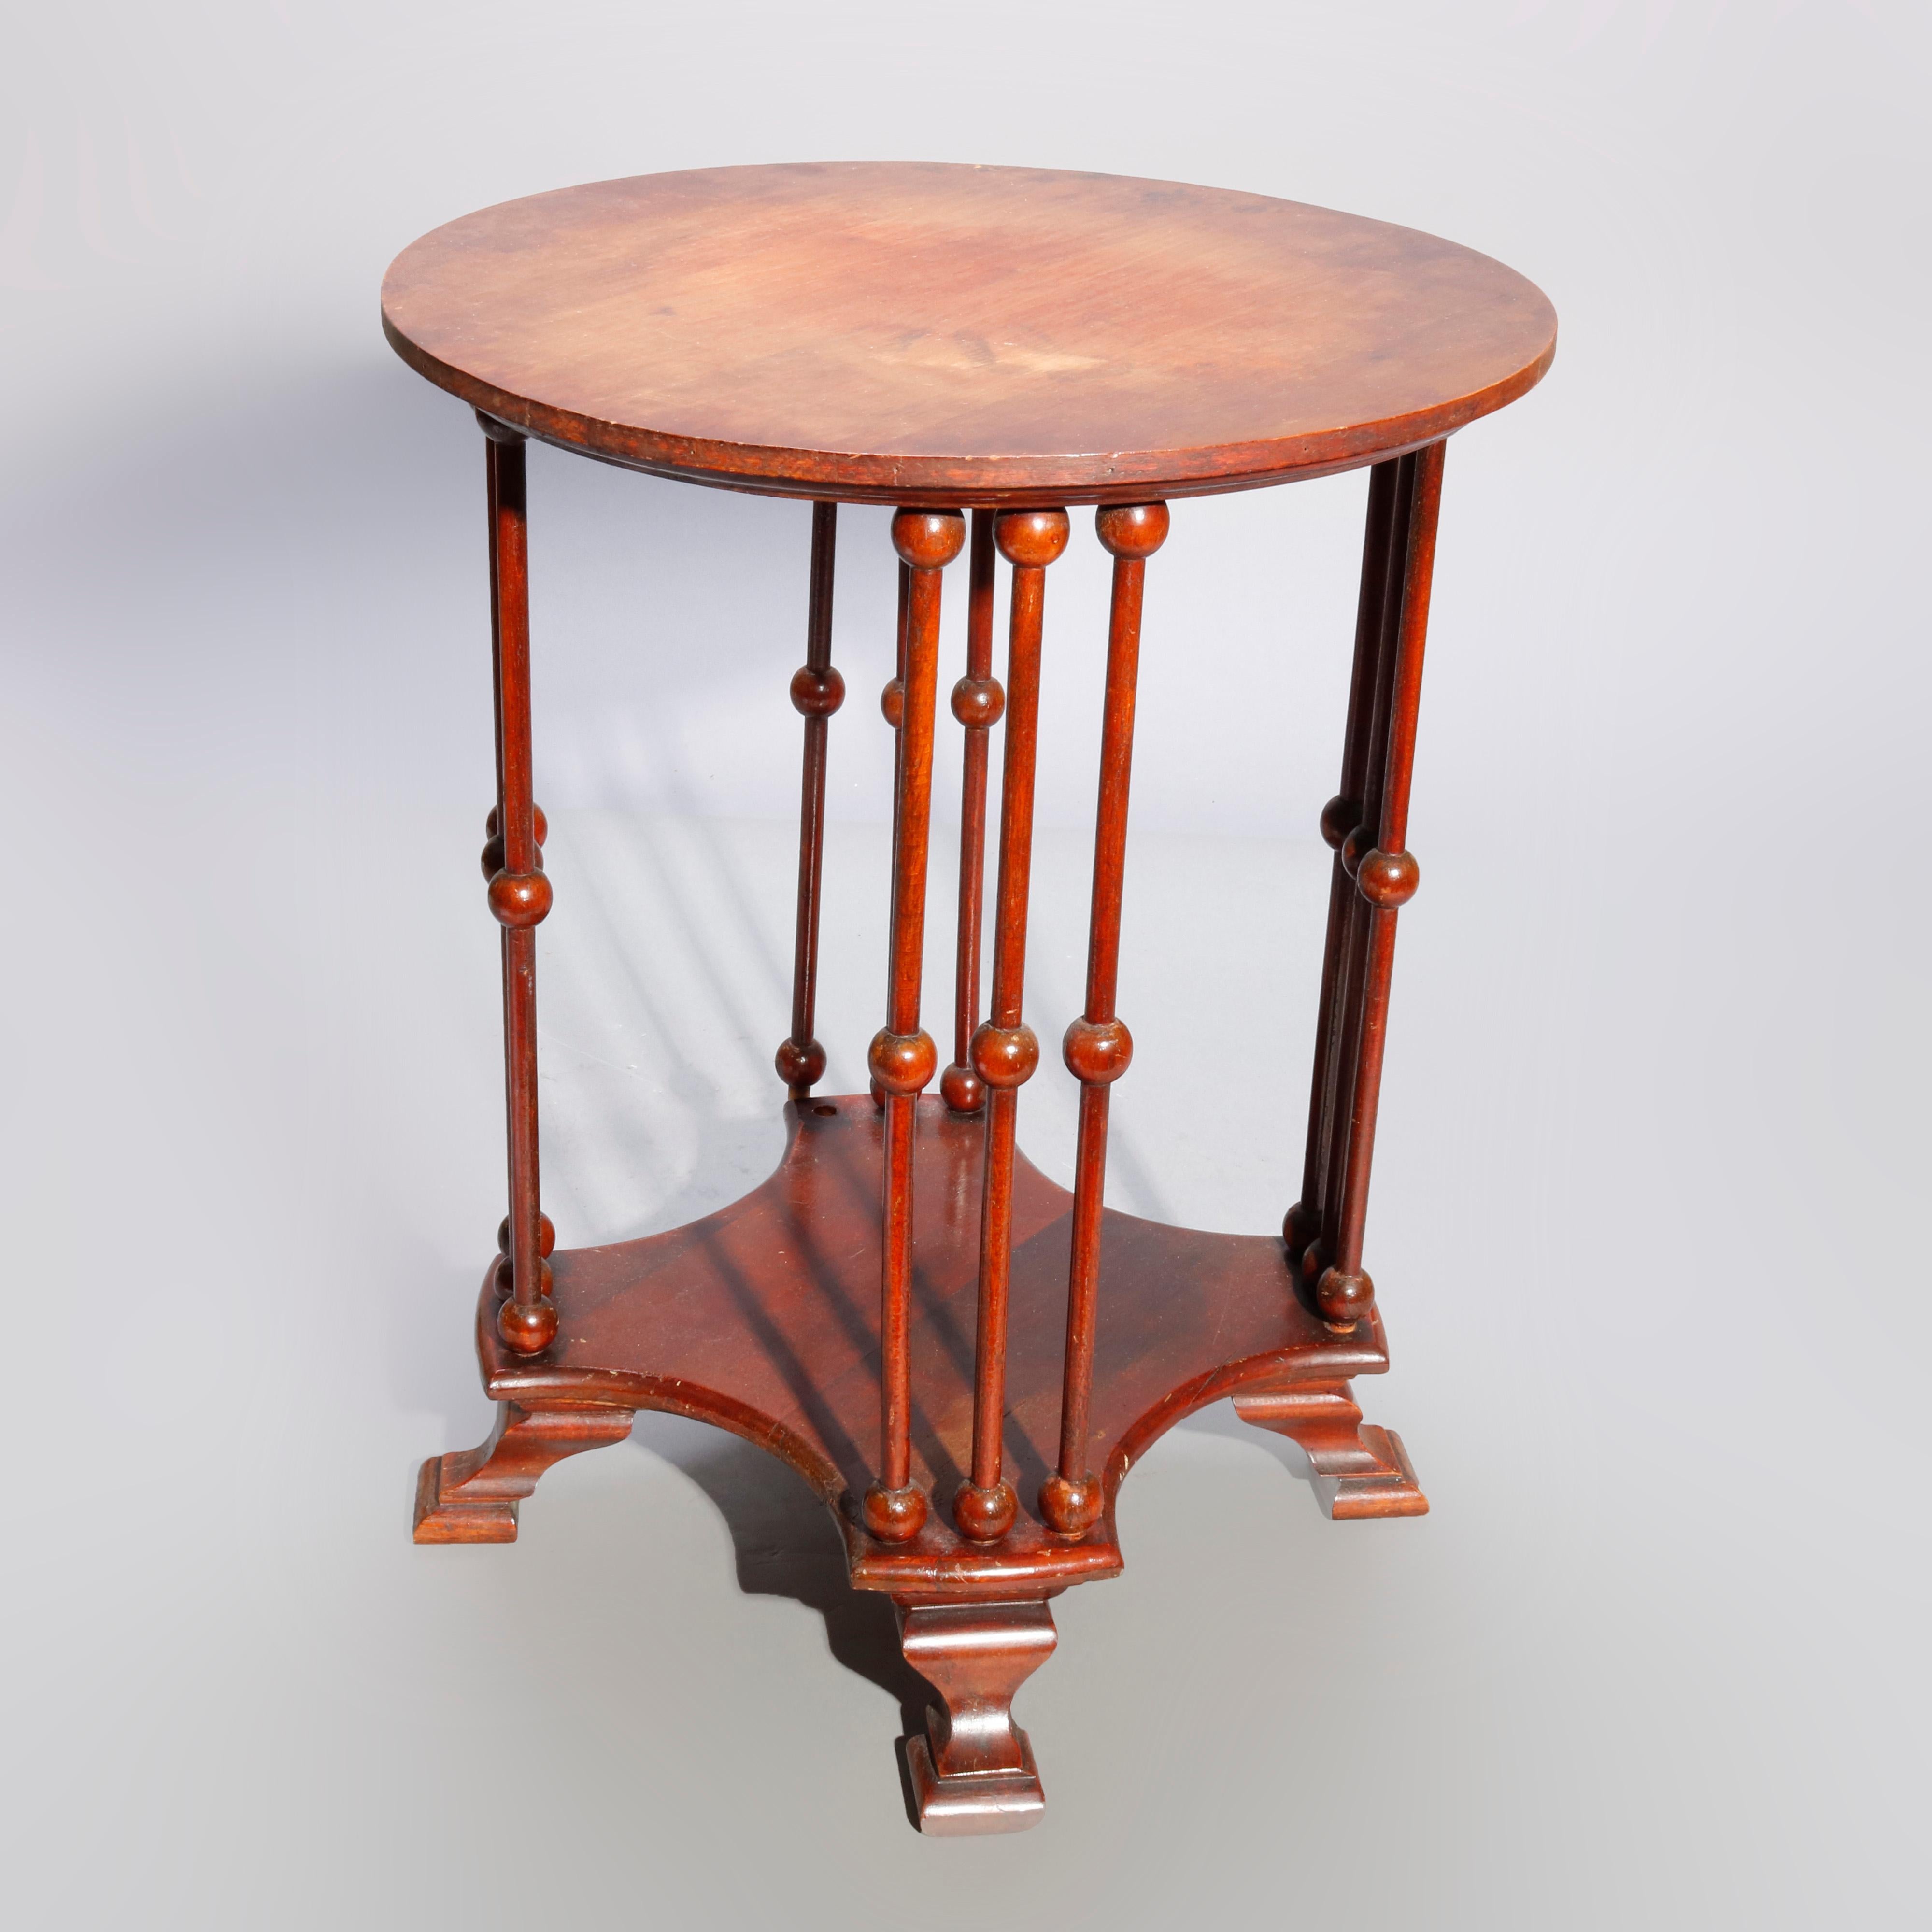 An antique Arts & Crafts style side table offers mahogany construction with round top surmounting stick and ball base having shaped lower shelf and raised on stylized spade feet, 20th century

Measures: 19.25